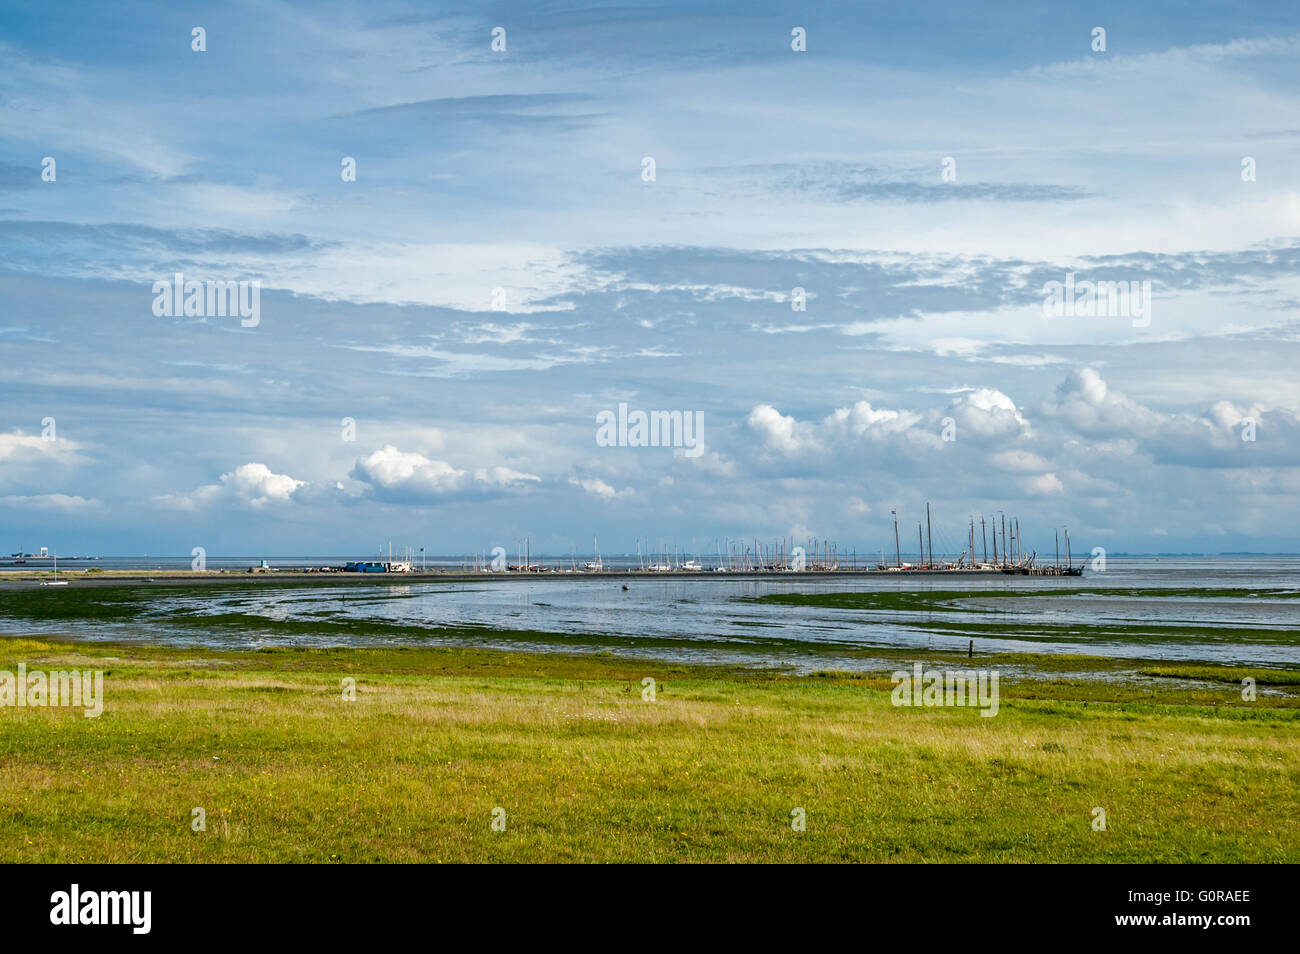 Wetlands and salt marshes of the Waddensea and the harbour of West-Frisian island Schiermonnikoog, Netherlands Stock Photo